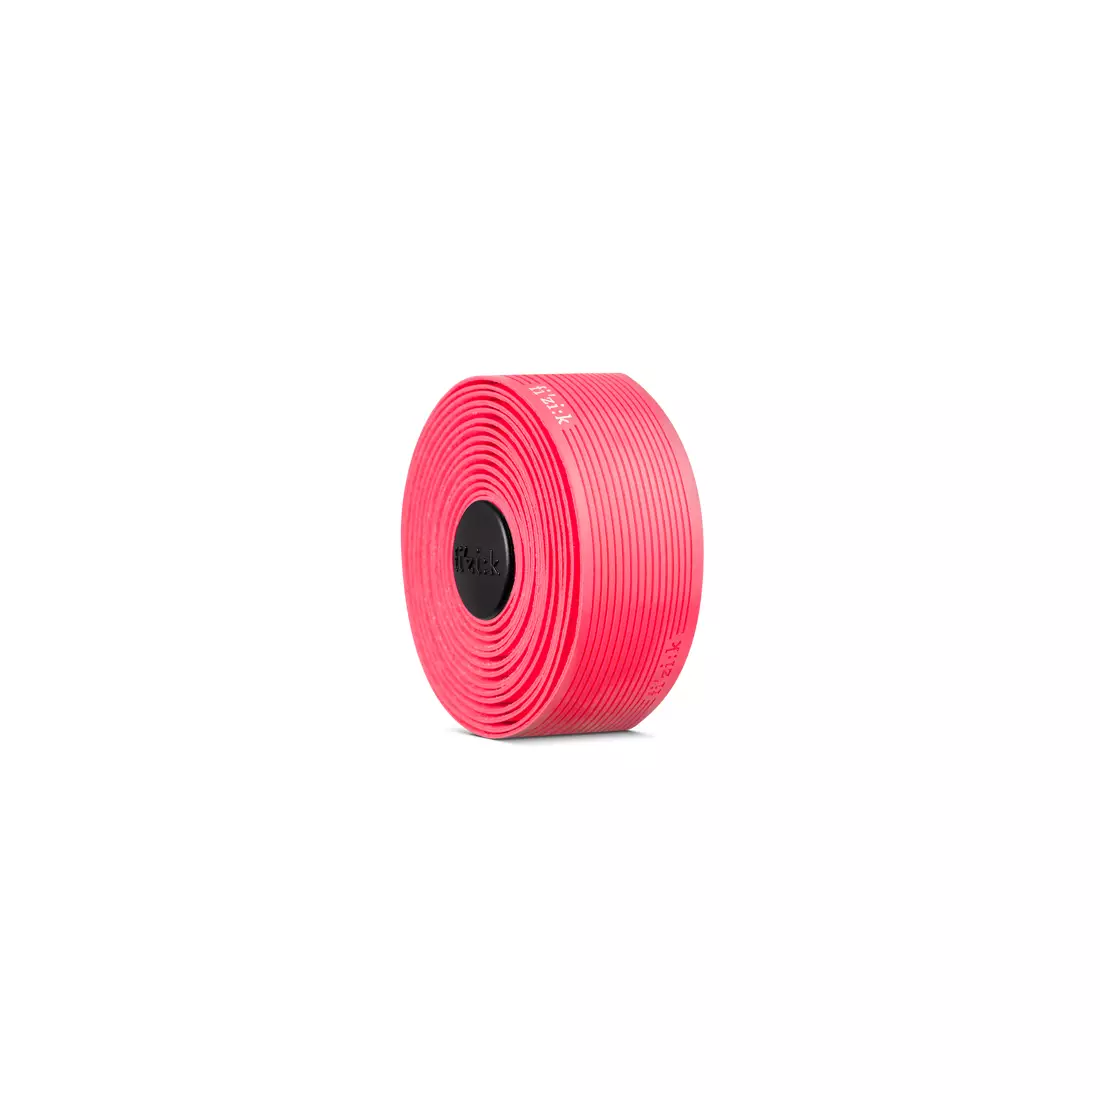 FIZIK steering wheel tape Vento Microtex Tacky 2mm pink BT09A00050